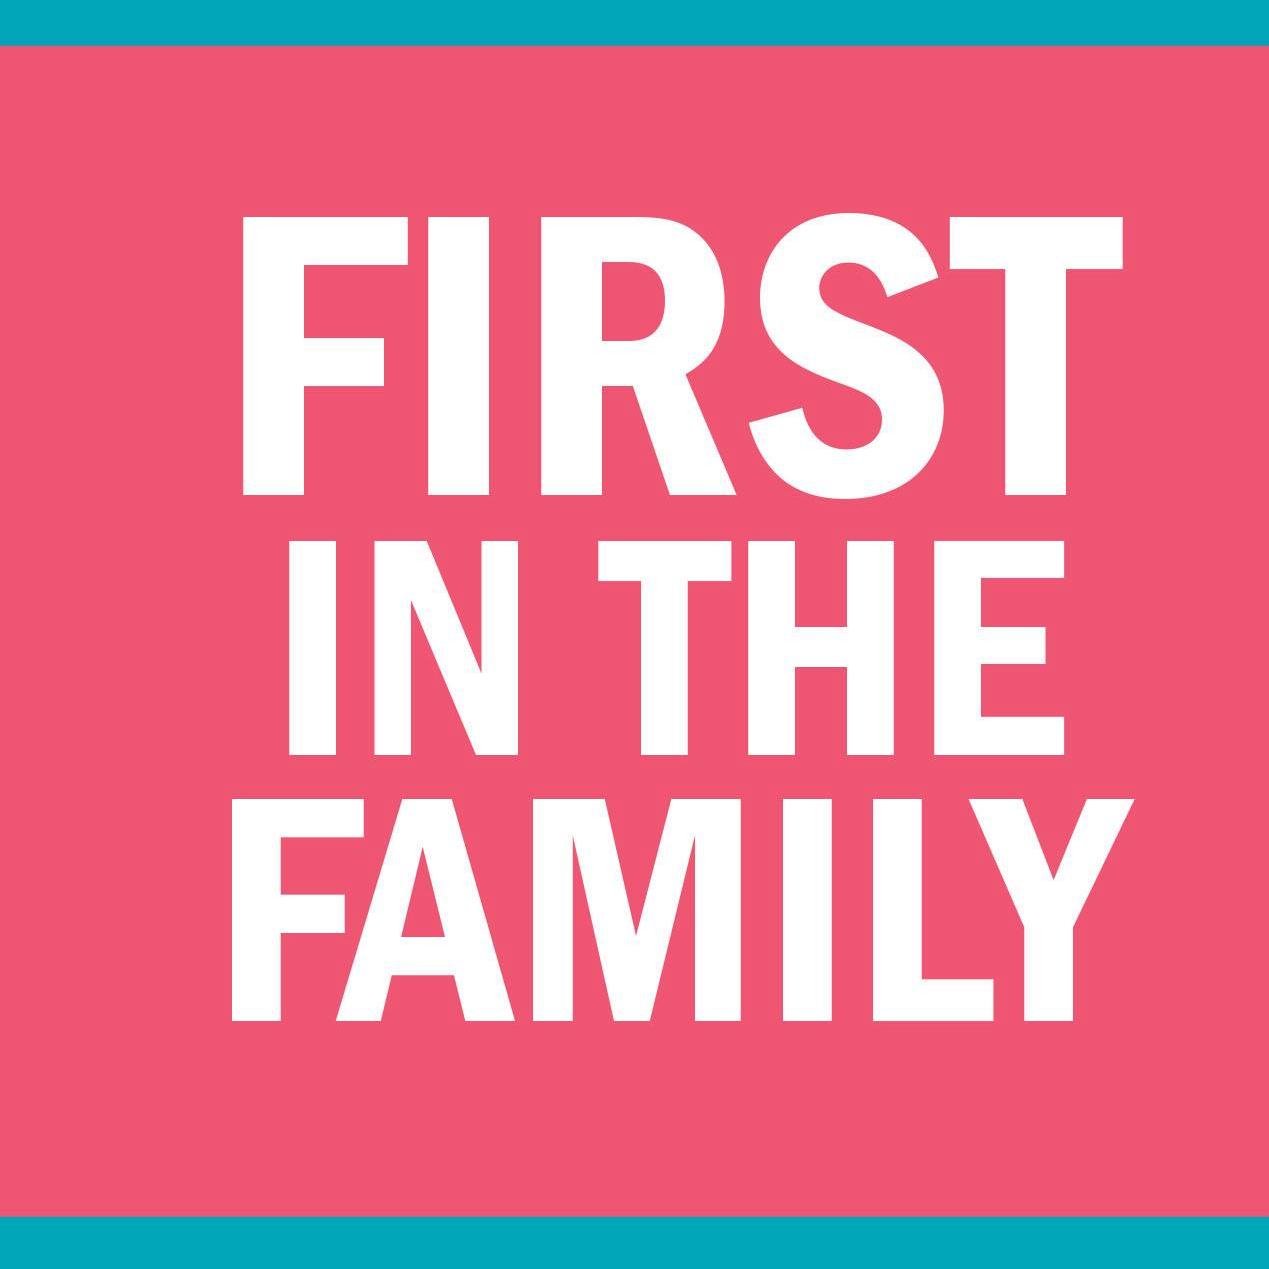 First in the Family is for First Generation students at Humber.
Are you the first?